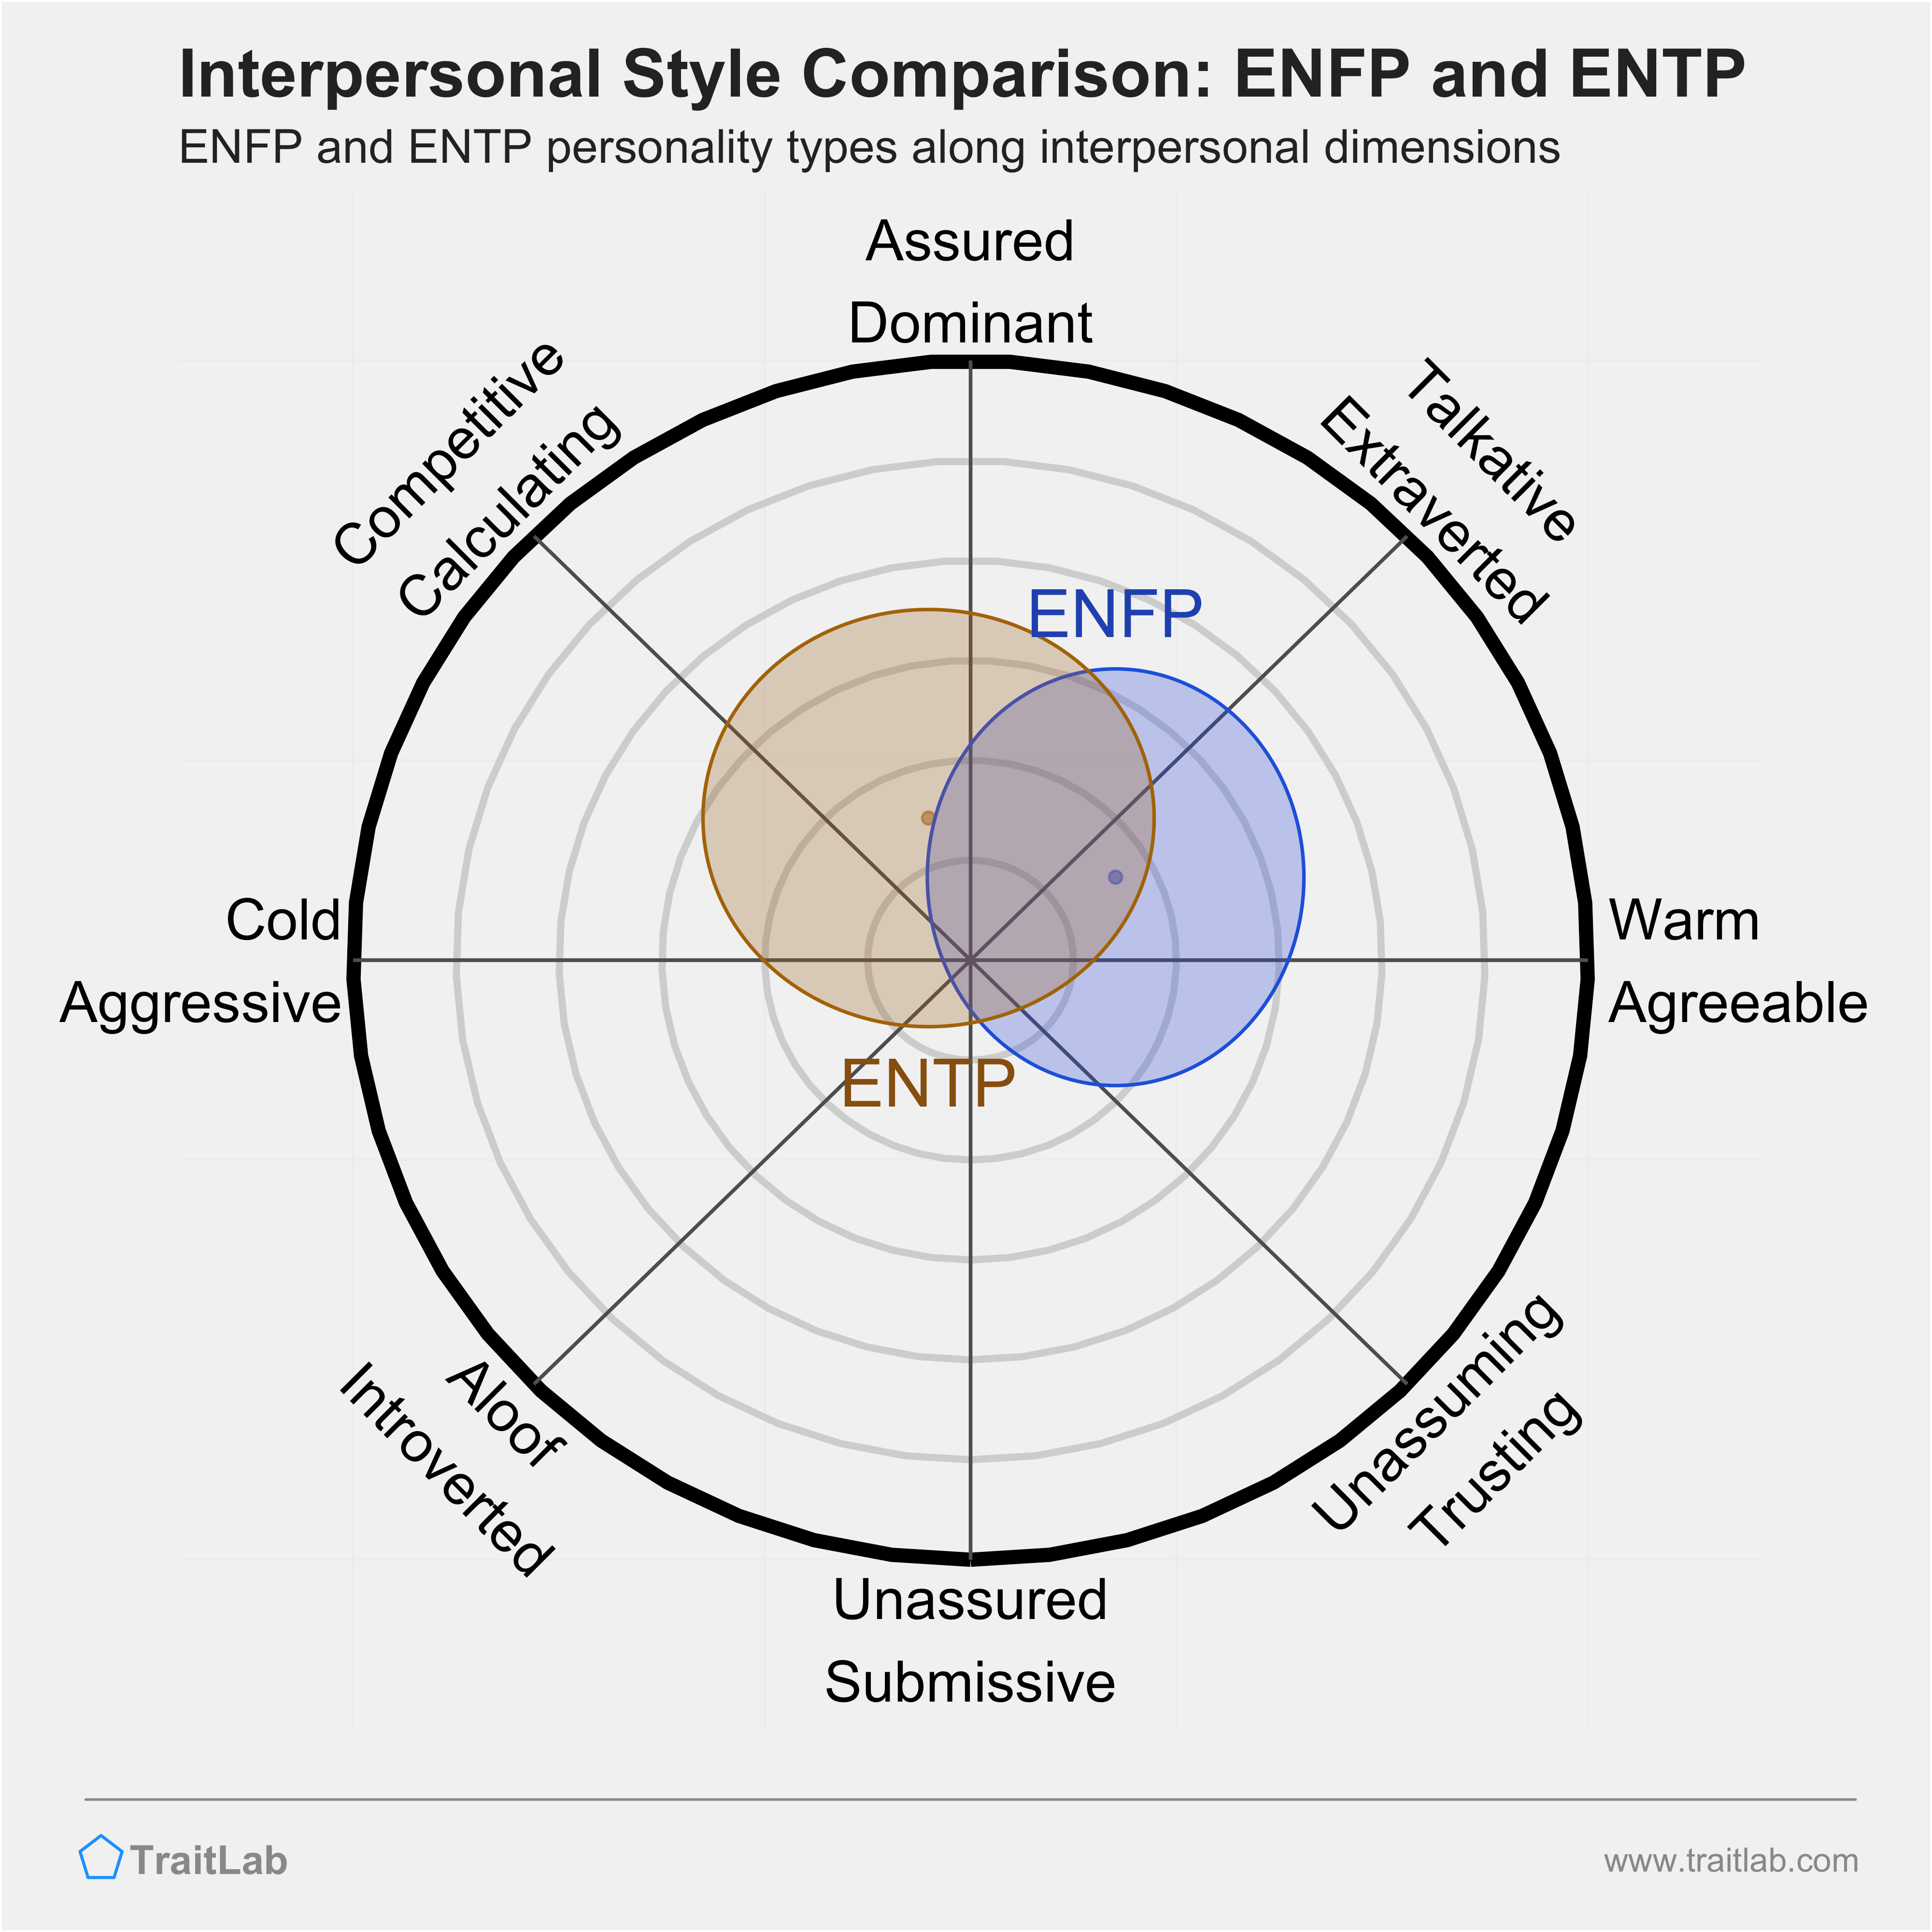 ENFP and ENTP comparison across interpersonal dimensions